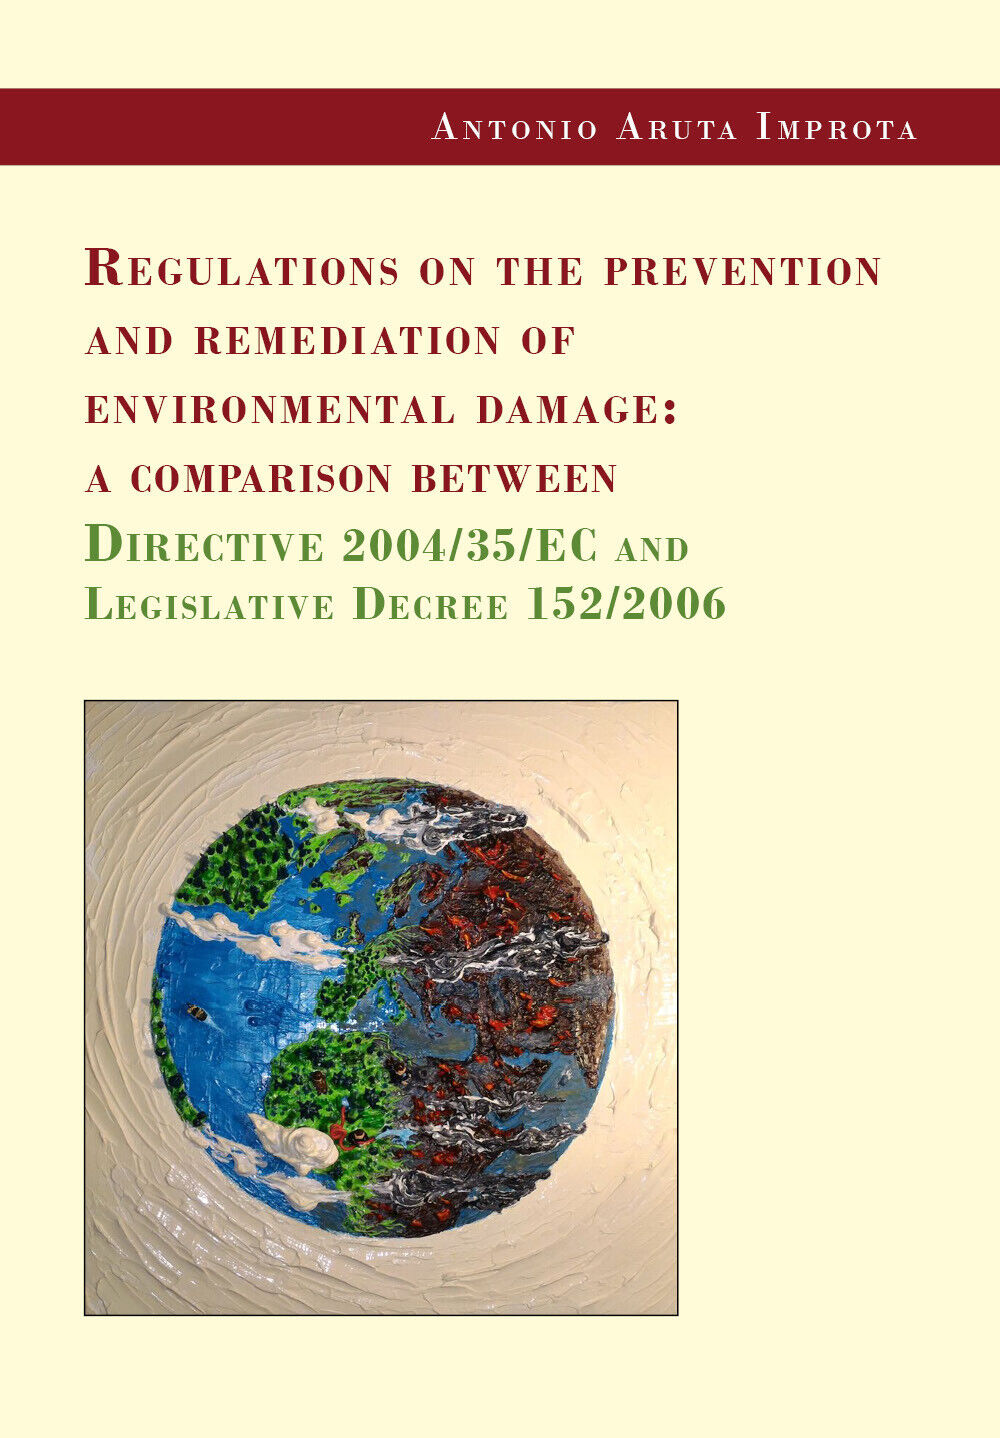 Regulations on the prevention and remediation of environmental damage